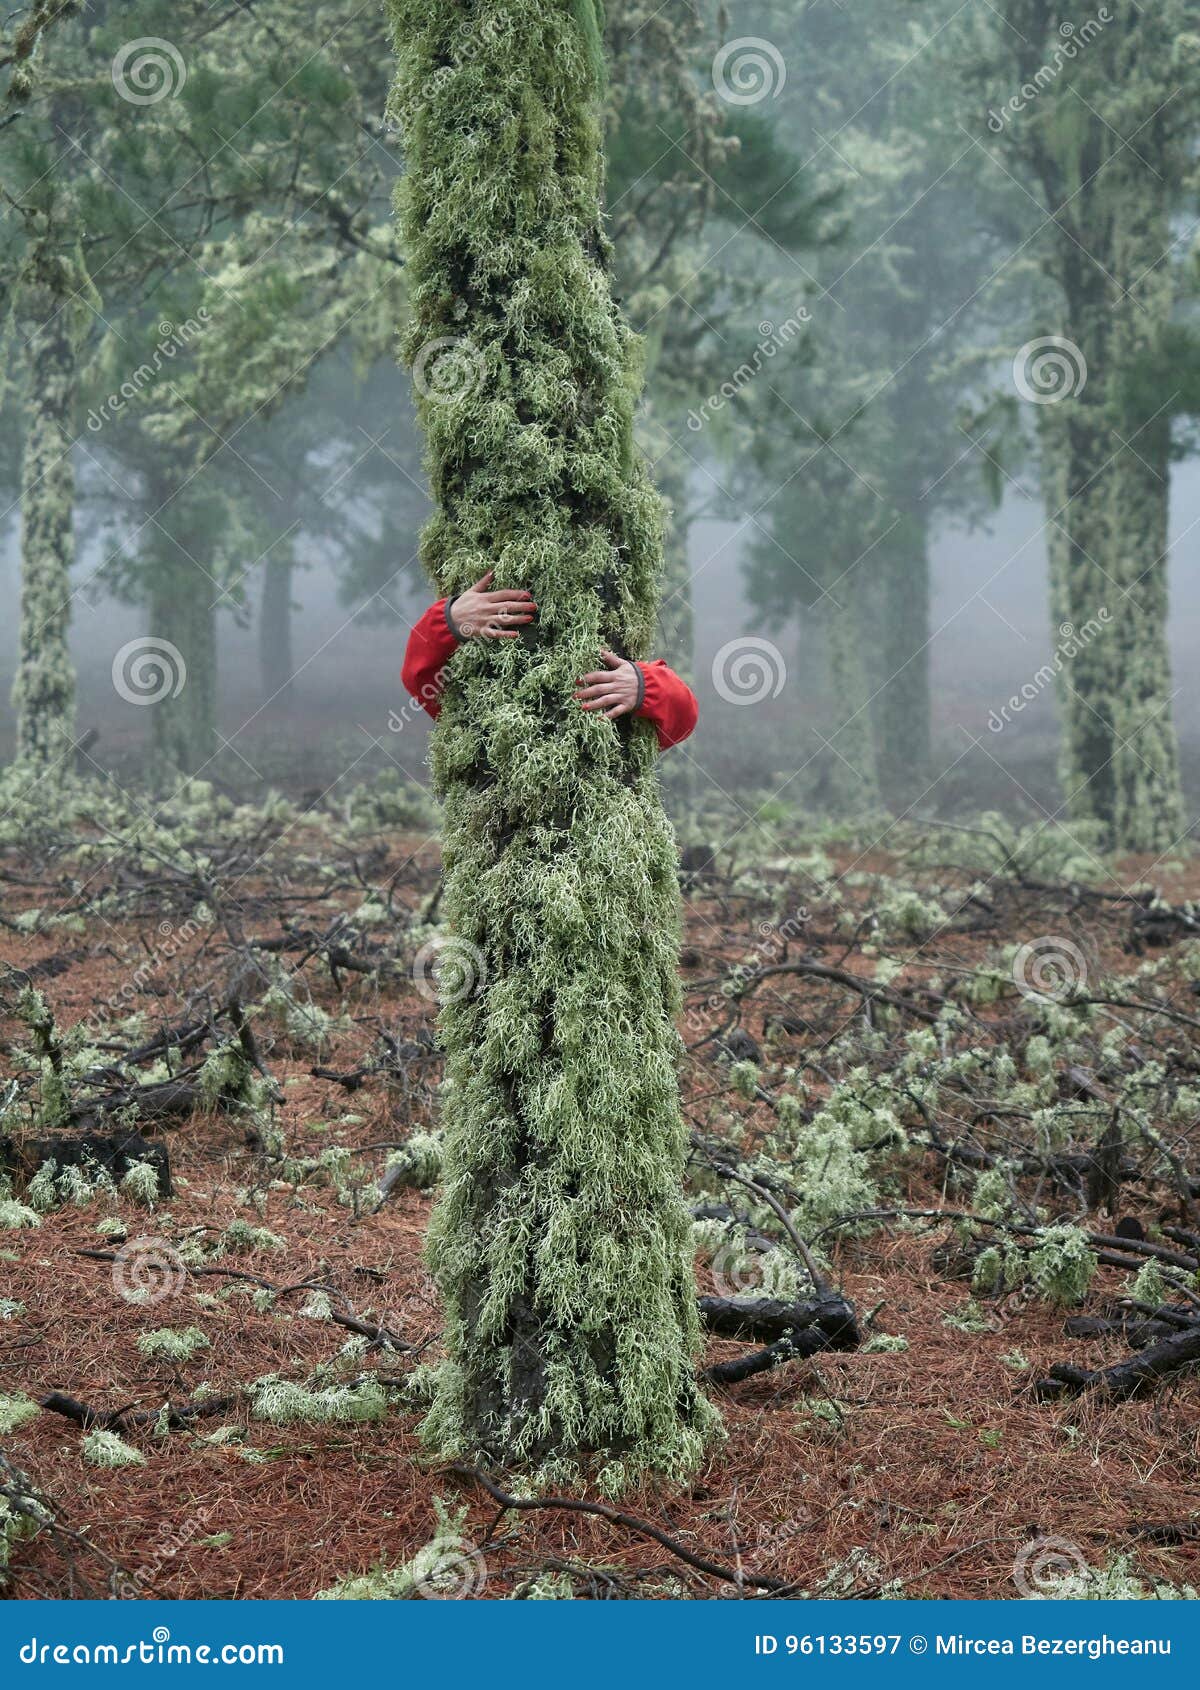 Young Woman Exploring Stunning Autumn Foggy Forest Stock Image - Image